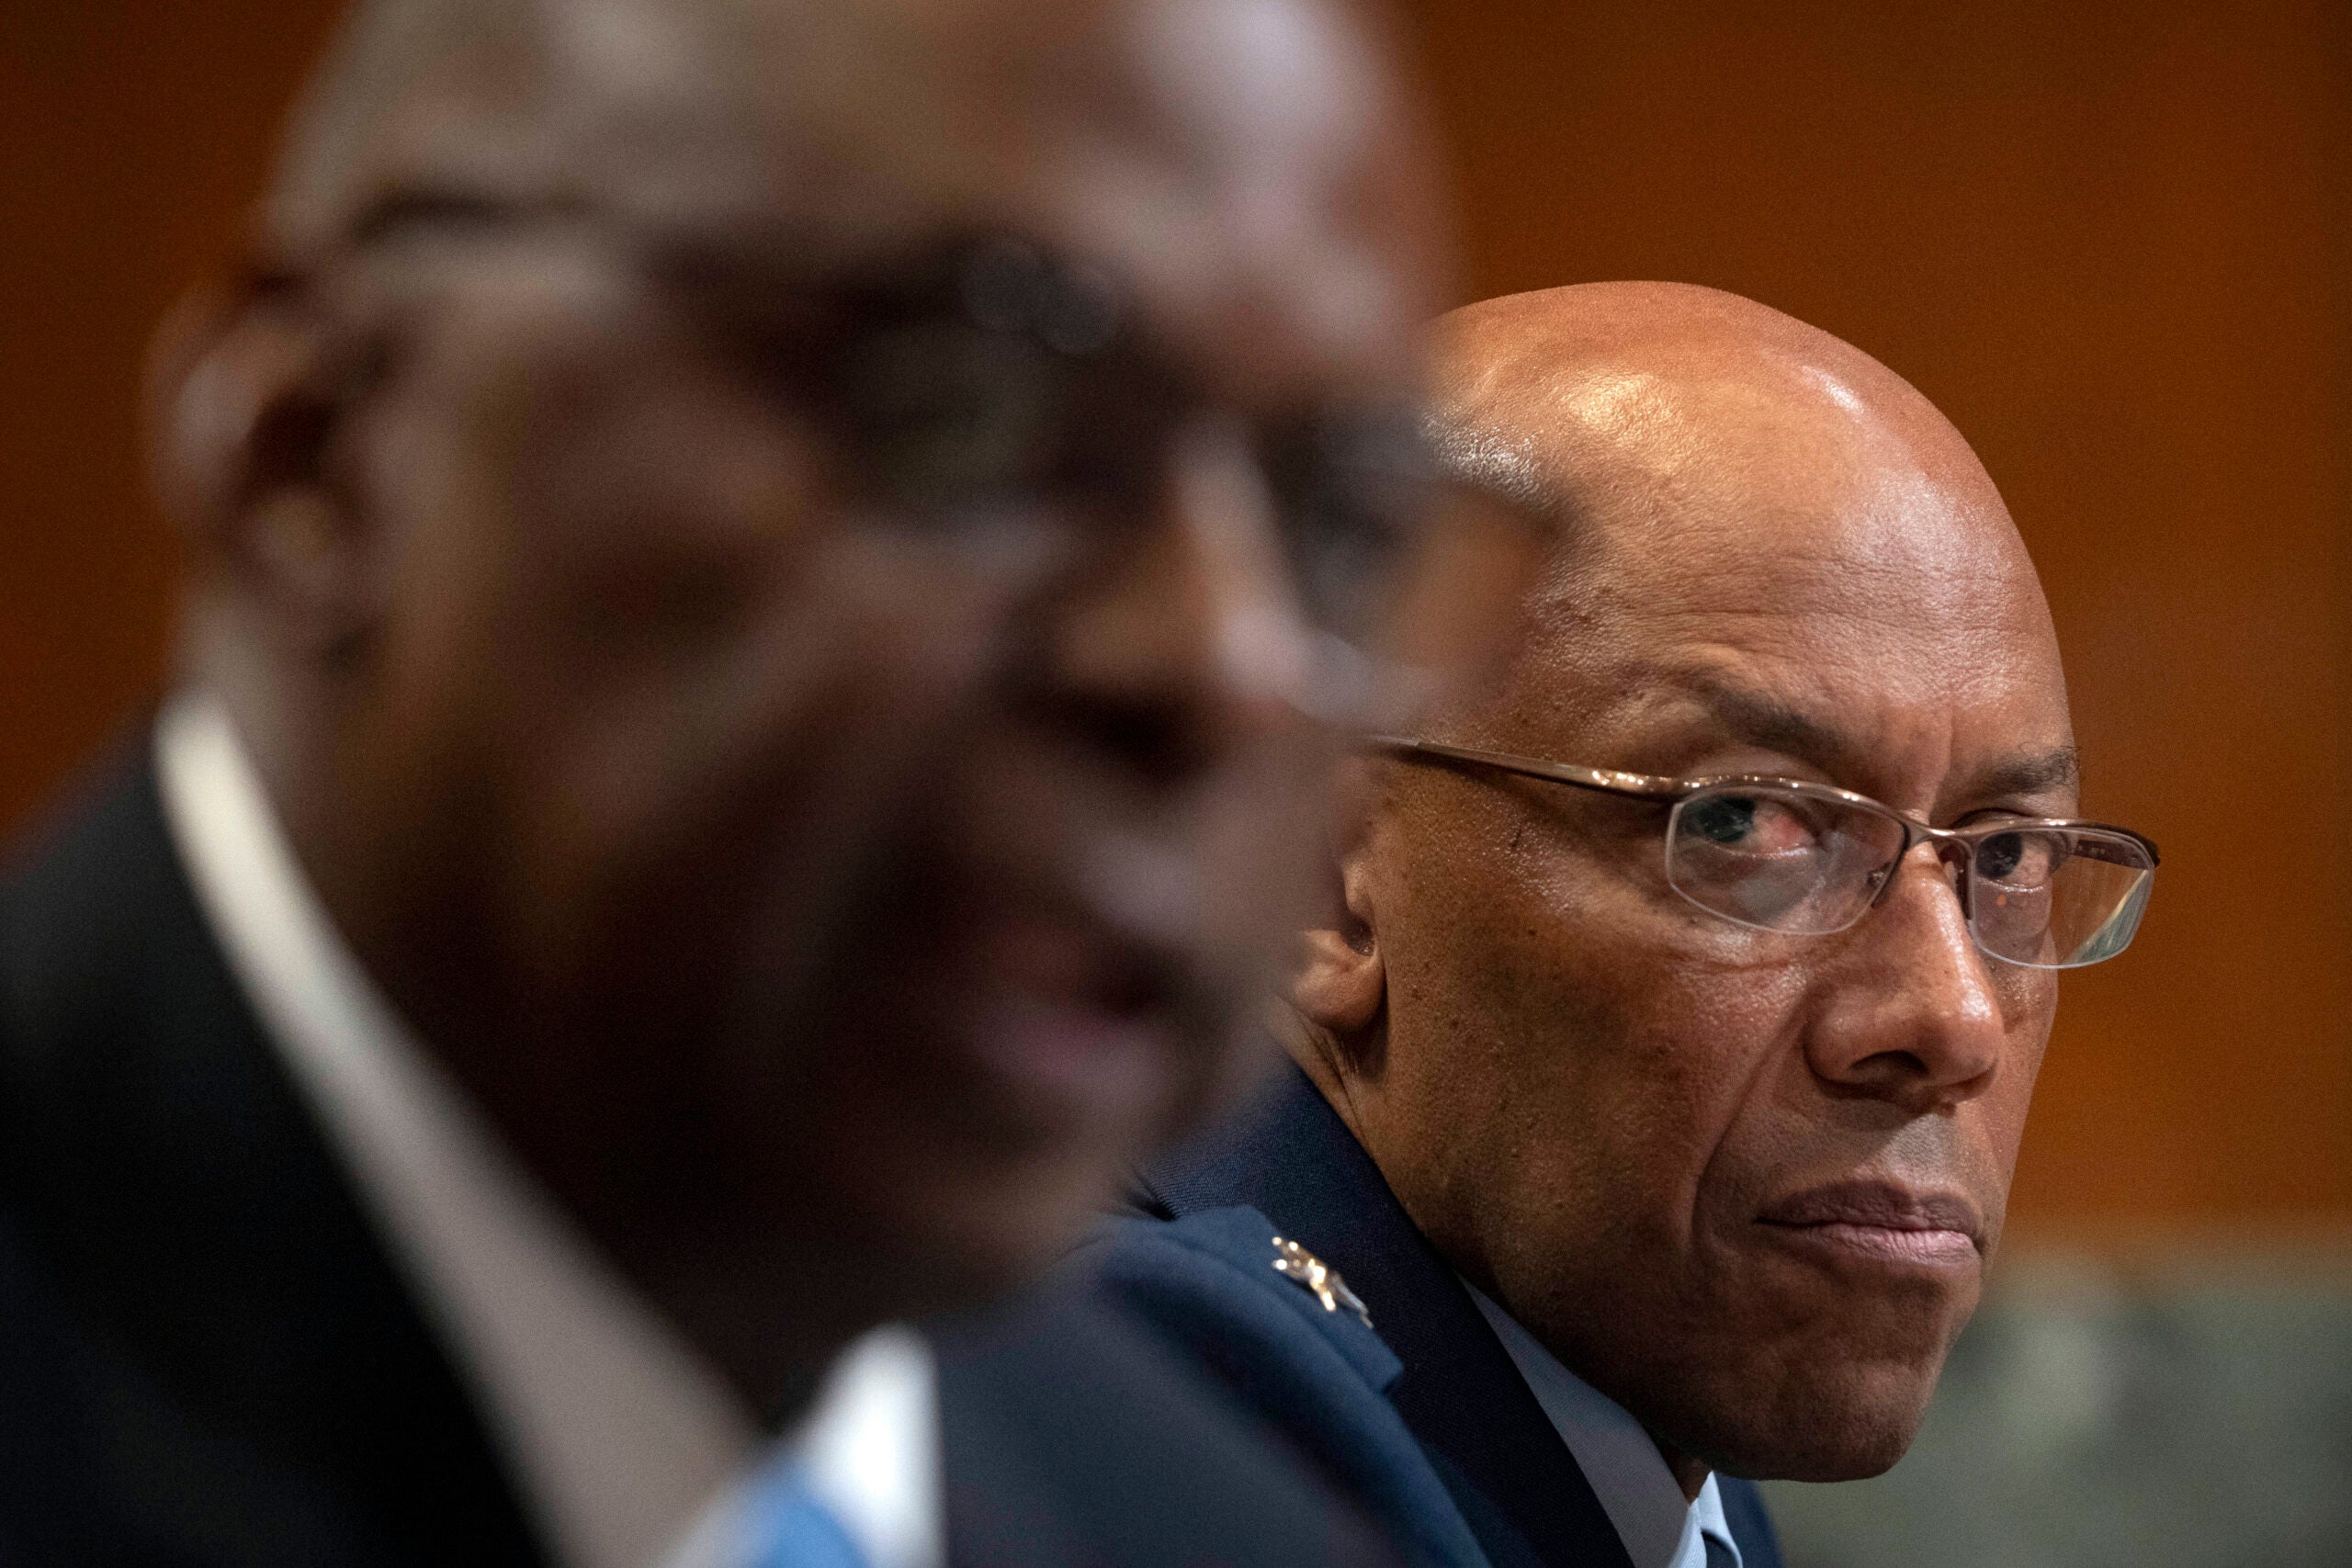 Chairman of the Joint Chiefs of Staff Air Force Gen. CQ Brown listens as Secretary of Defense Lloyd Austin speaks during a hearing.